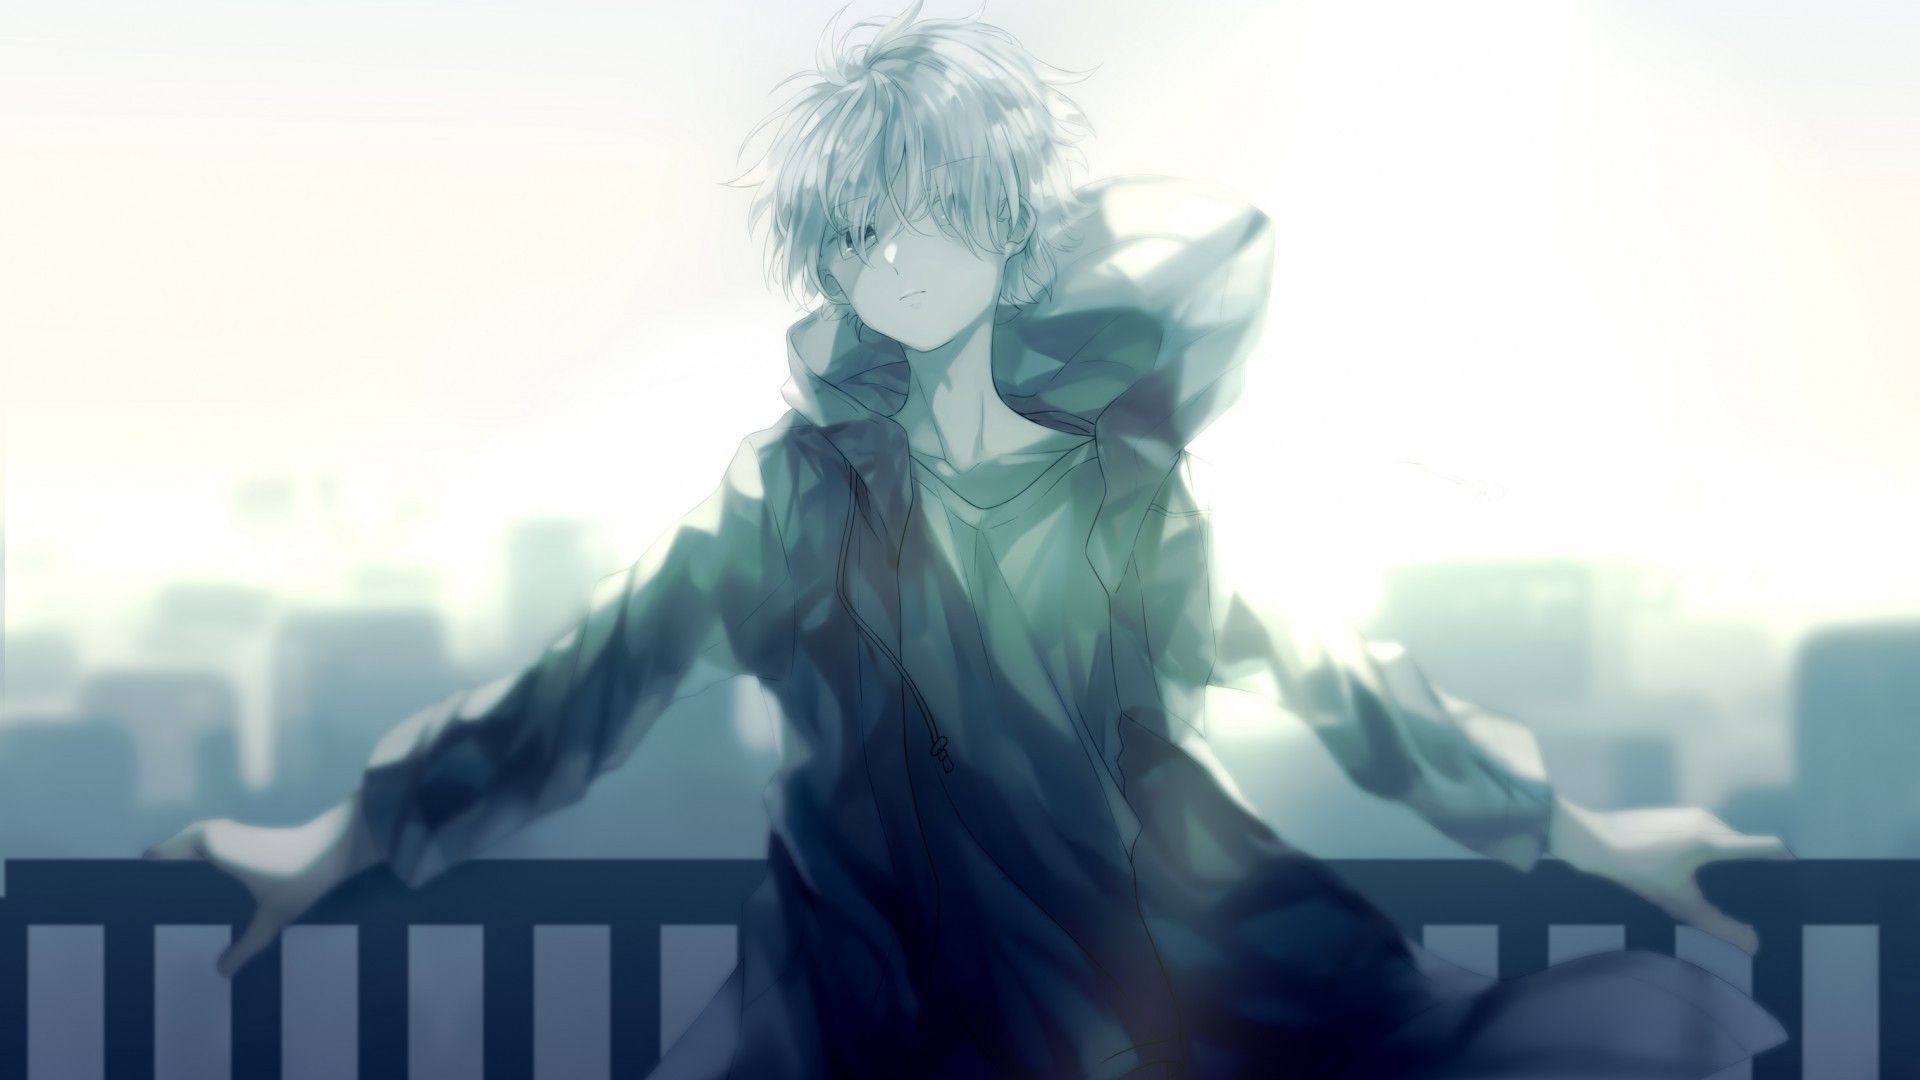 Download 1920x1080 Cool Anime Boy, Hoodie, White Hair, Fence, Cityscape Wallpaper for Widescreen